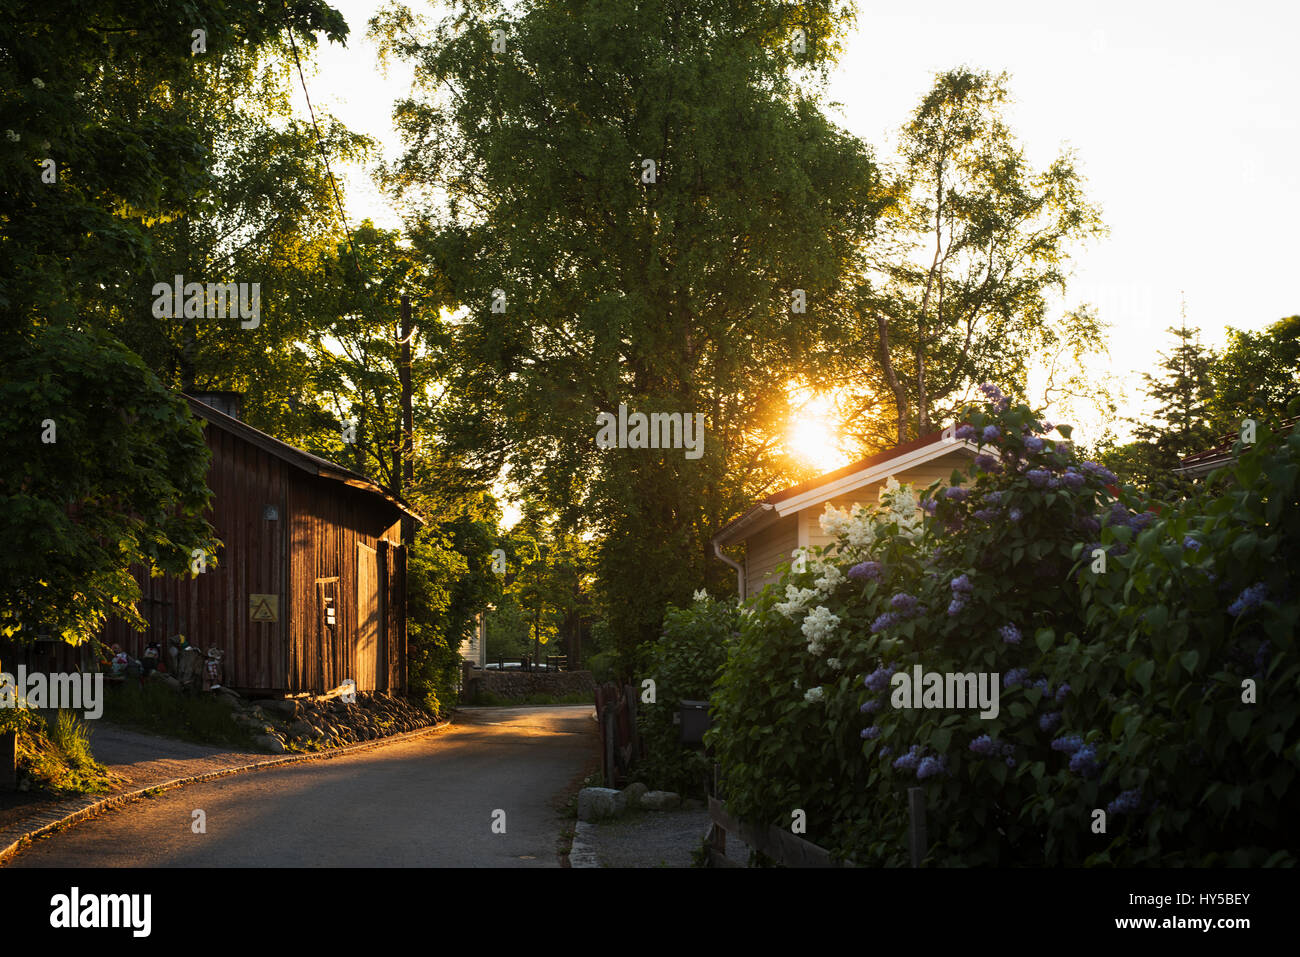 Finland, Pirkanmaa, Tampere, Road in small village Stock Photo